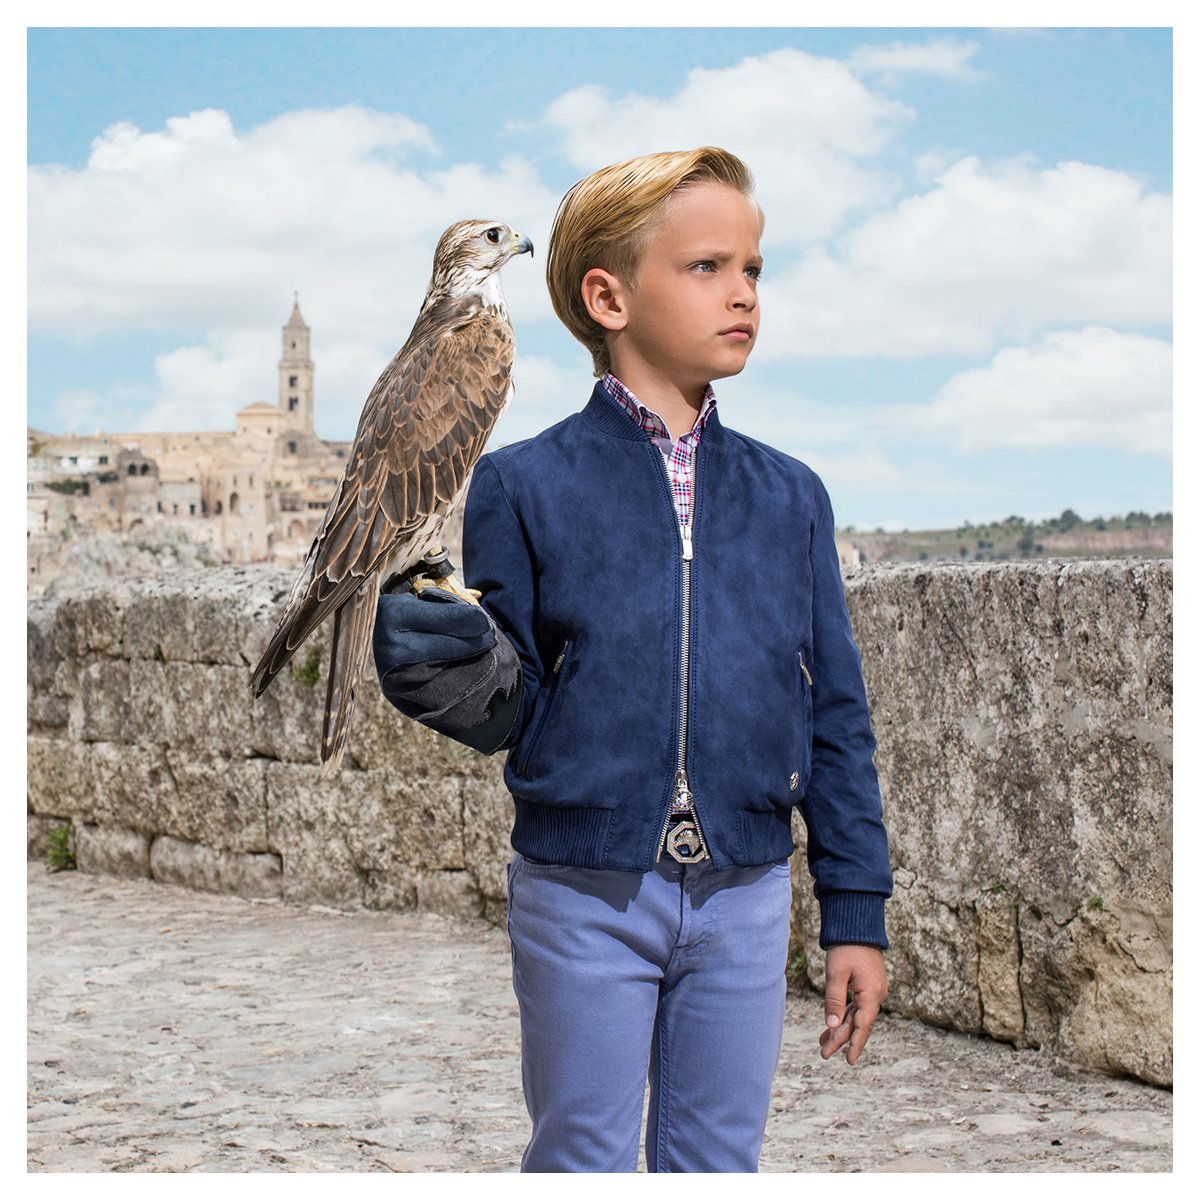 Fresh and fun: the  #SRJunior #ss18 collection, now in boutique and online at goo.gl/Sr21hB
#stefanoricci #fromfathertoson #minime #fattoinitalia #childrenswear #fashionkids  #kidsstyle #fashionkidsworld #style #Florence #Italy